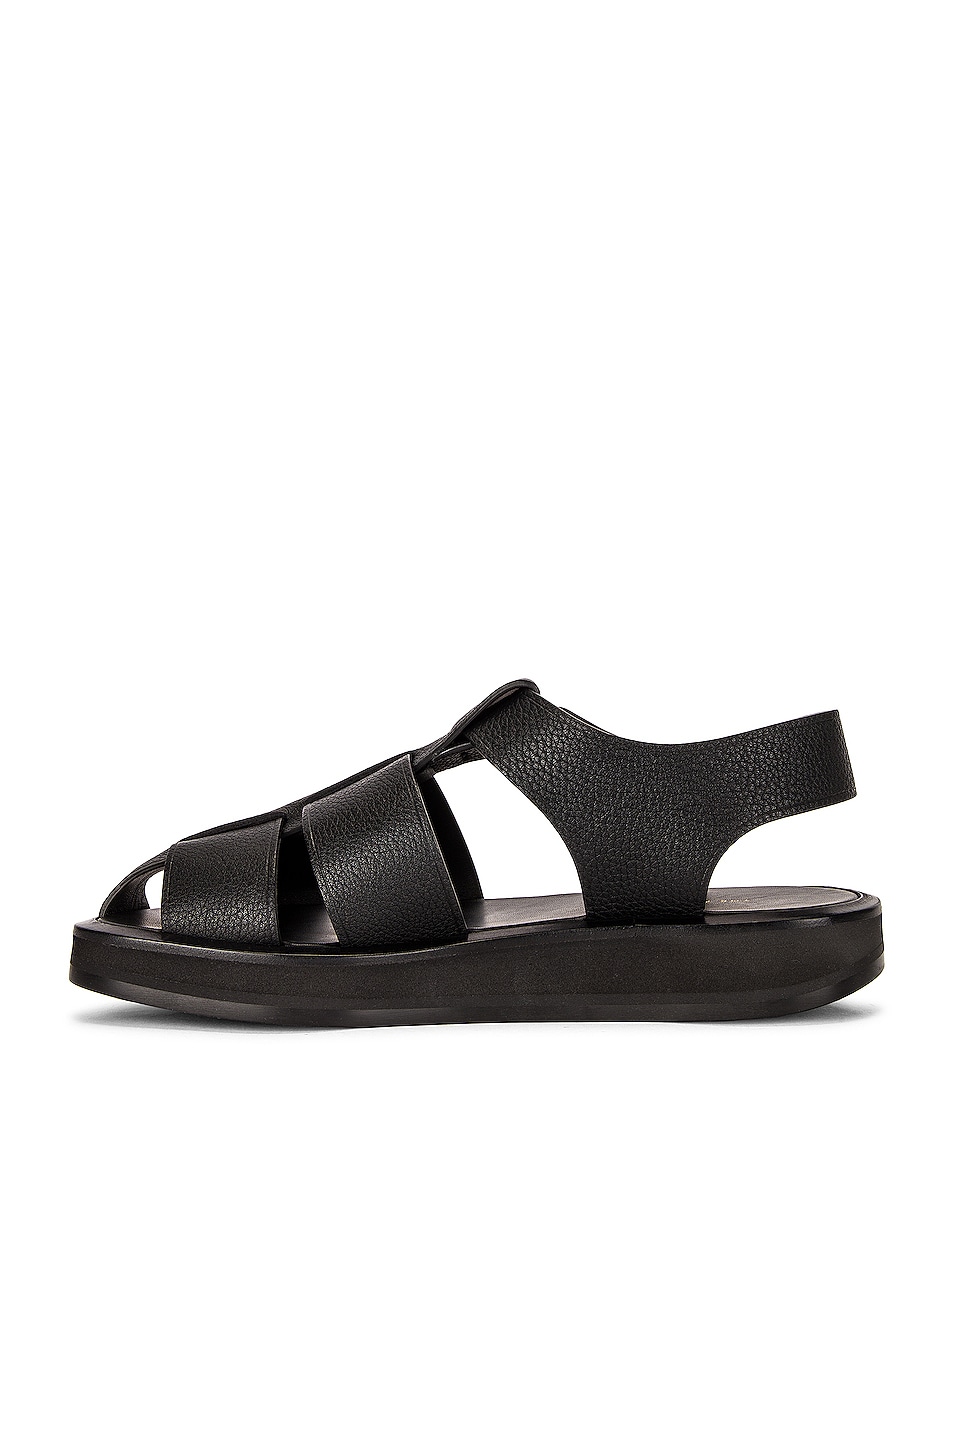 The Row Fisherman Leather Sandals in Black | FWRD